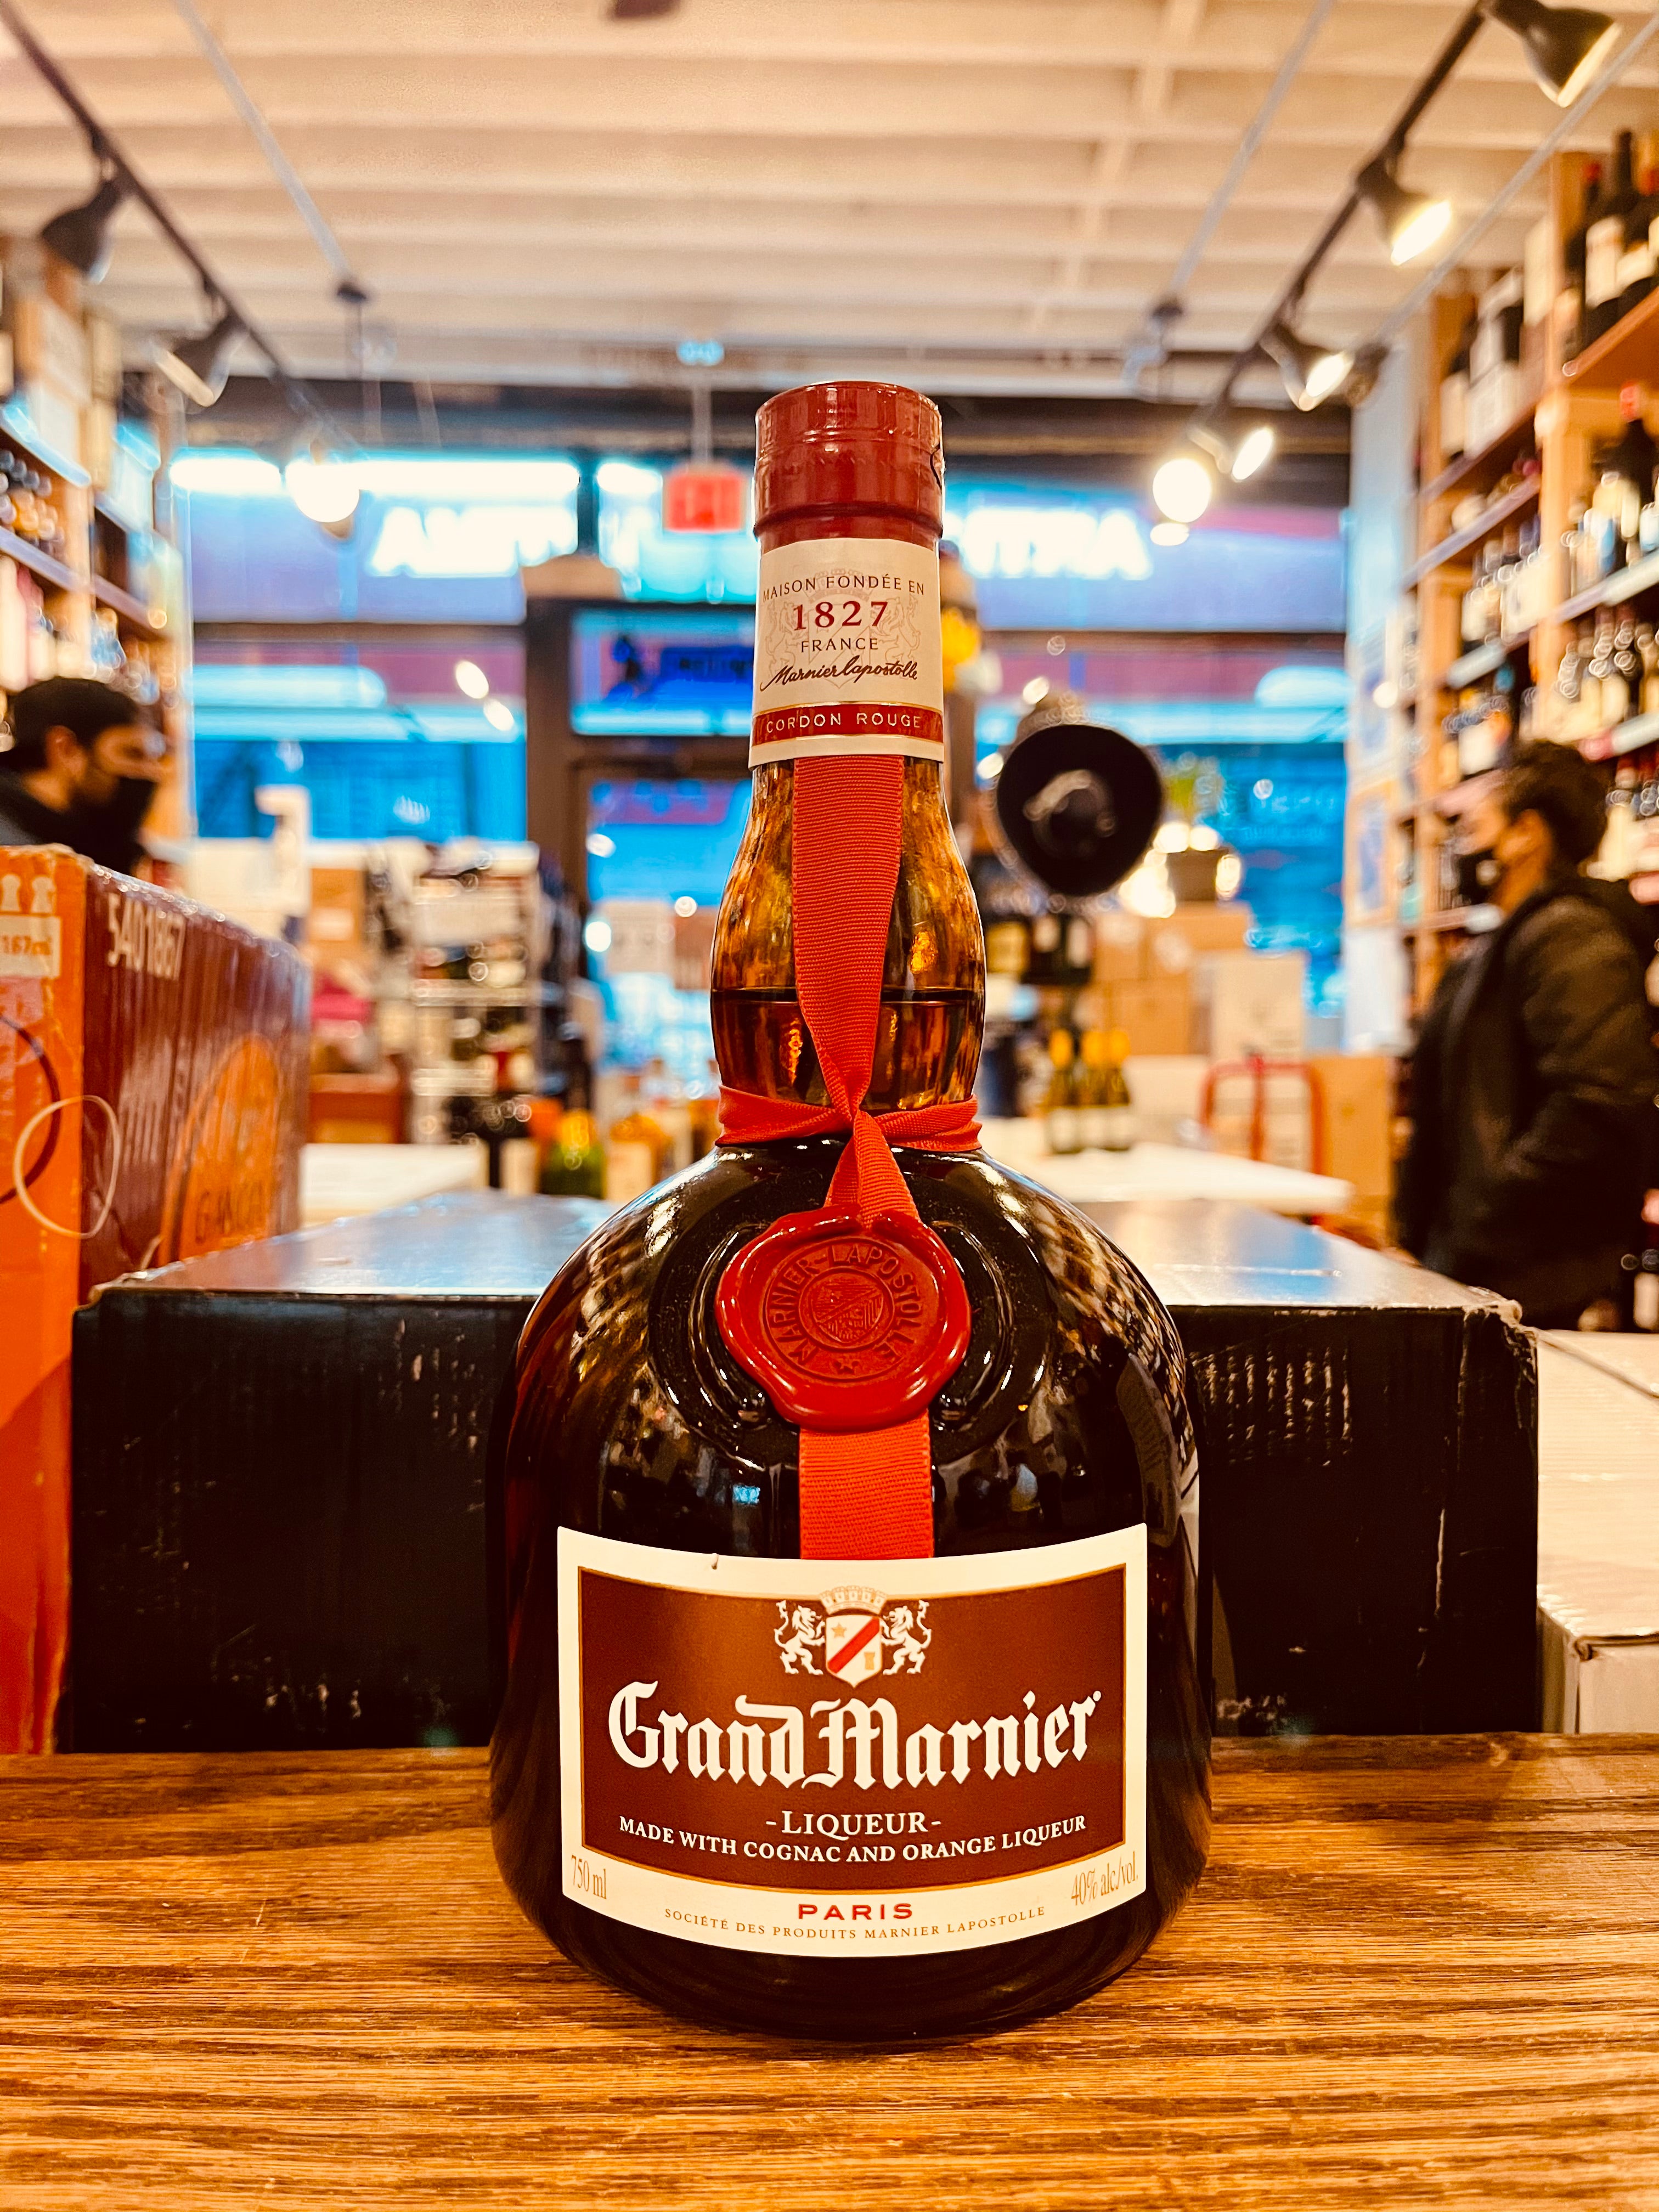 Grand Marnier 750ml short squat rounded bottle with a maroon label and red top